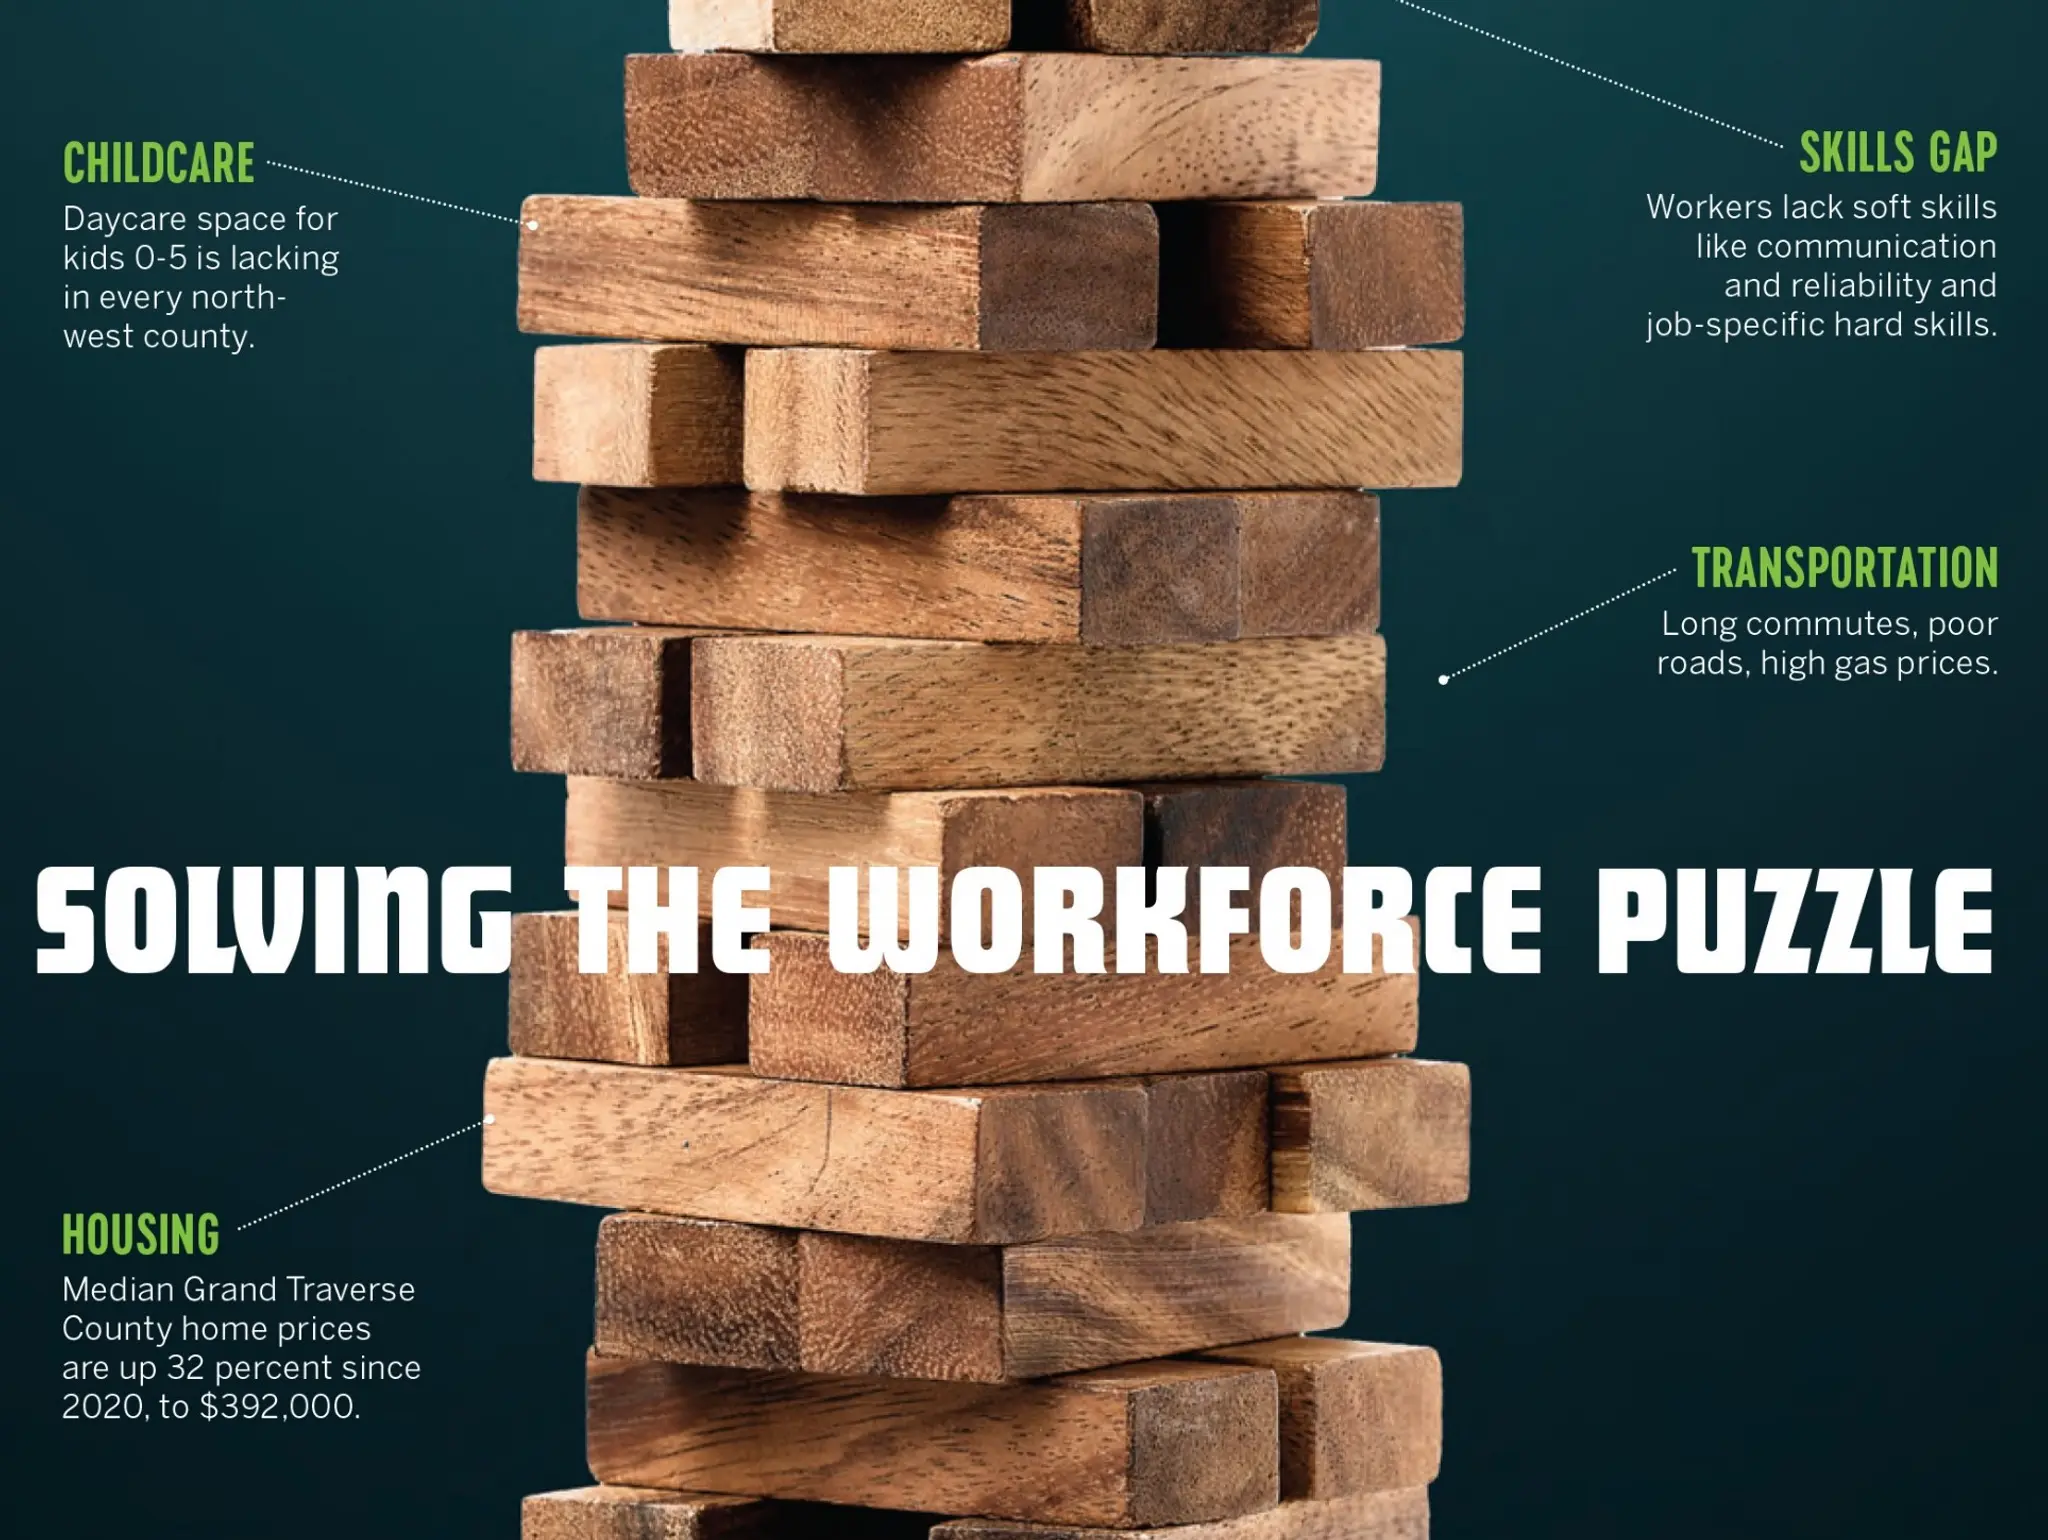 Solving the workforce puzzle